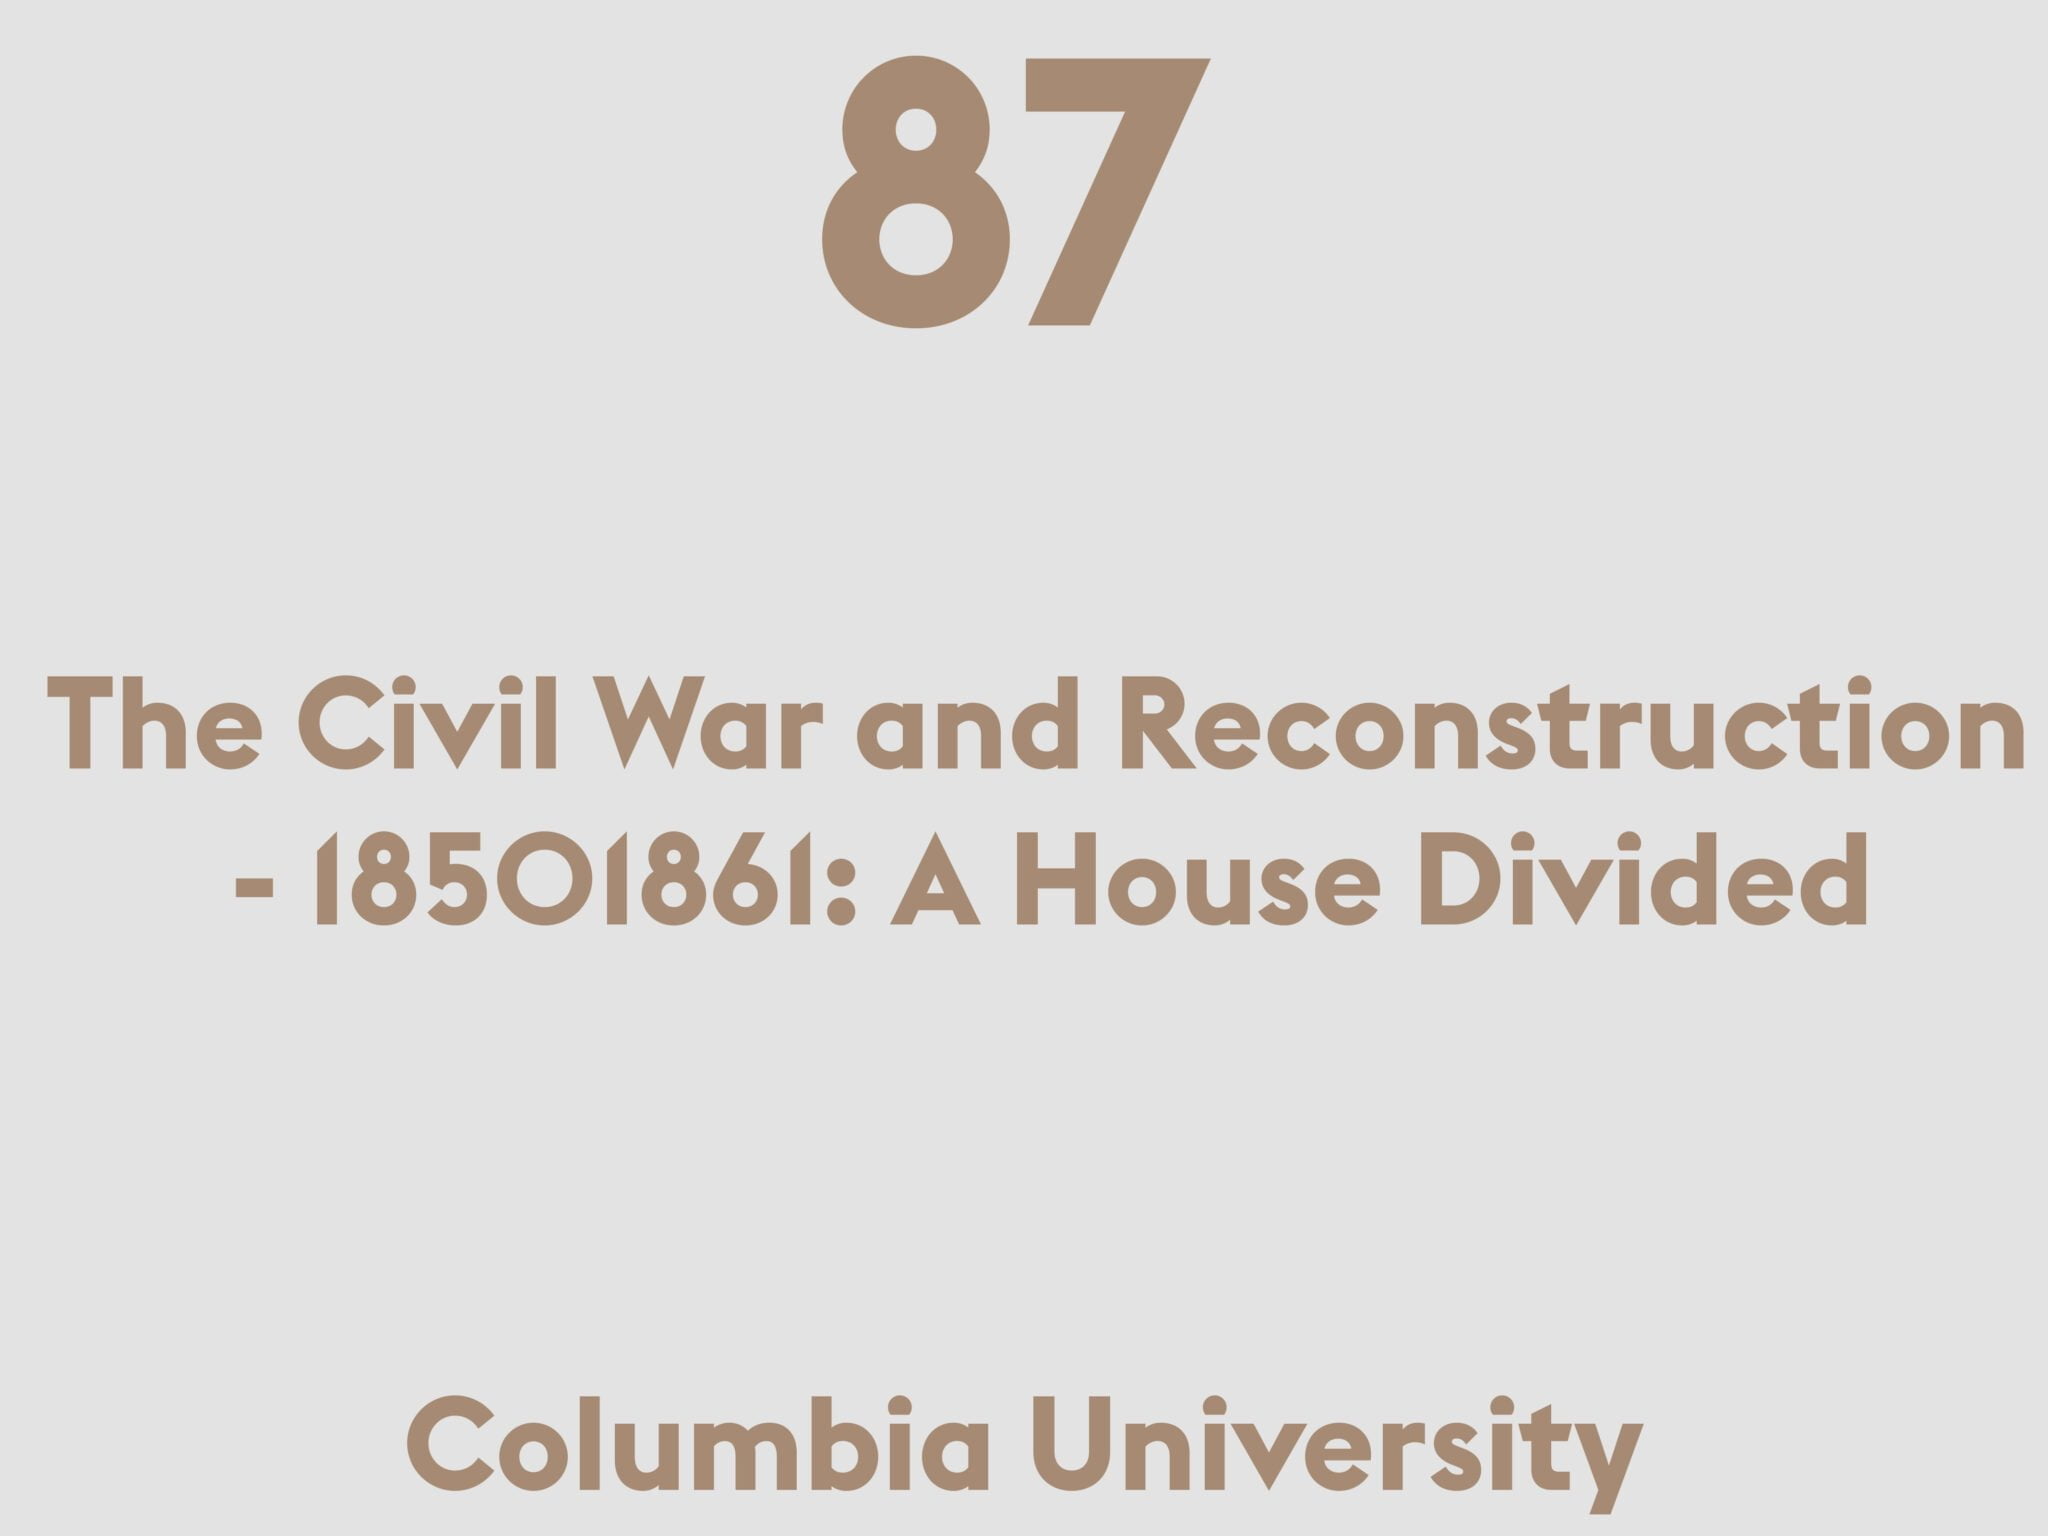 The Civil War and Reconstruction - 1850-1861: A House Divided